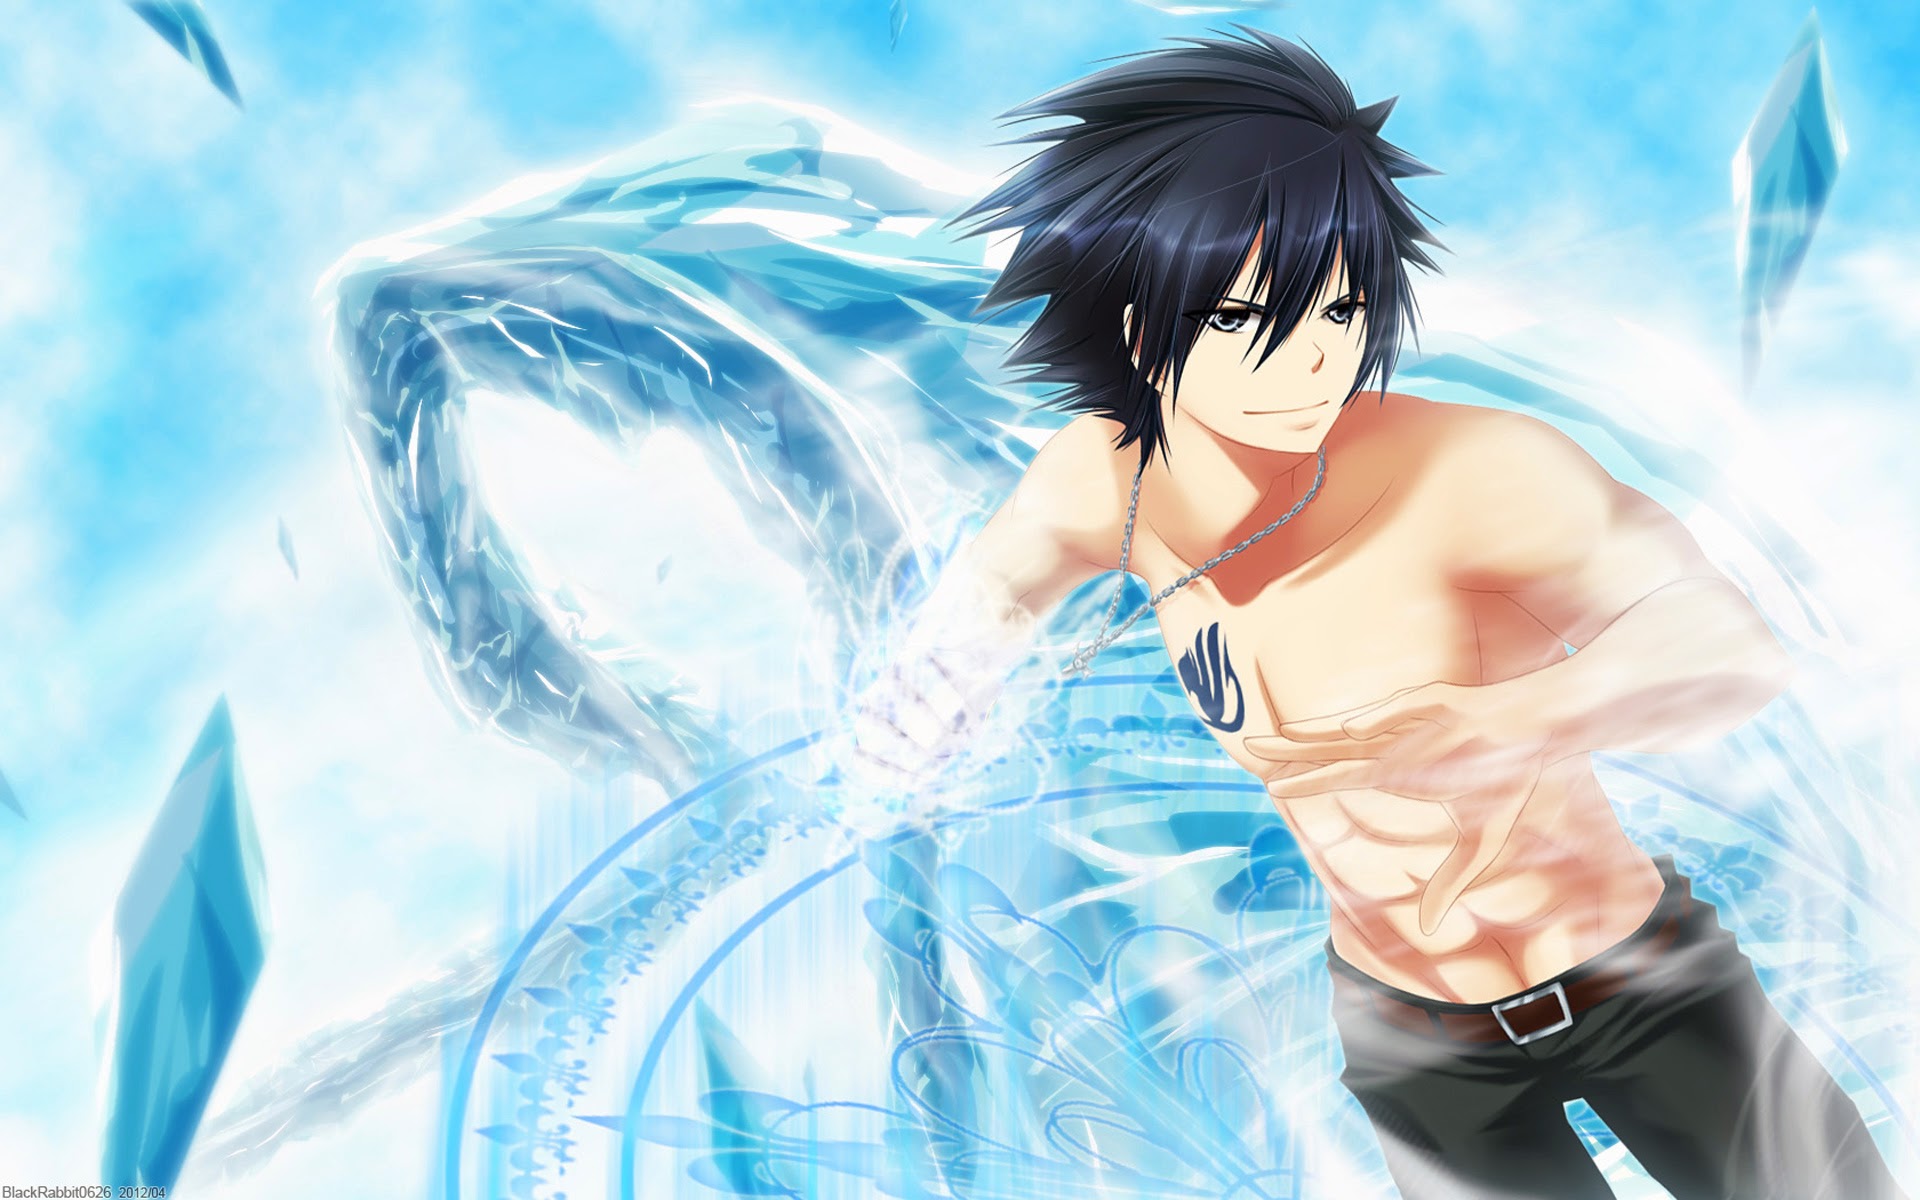 Gray Fullbuster Wallpaper HD Fairy Tail Anime Widescreen